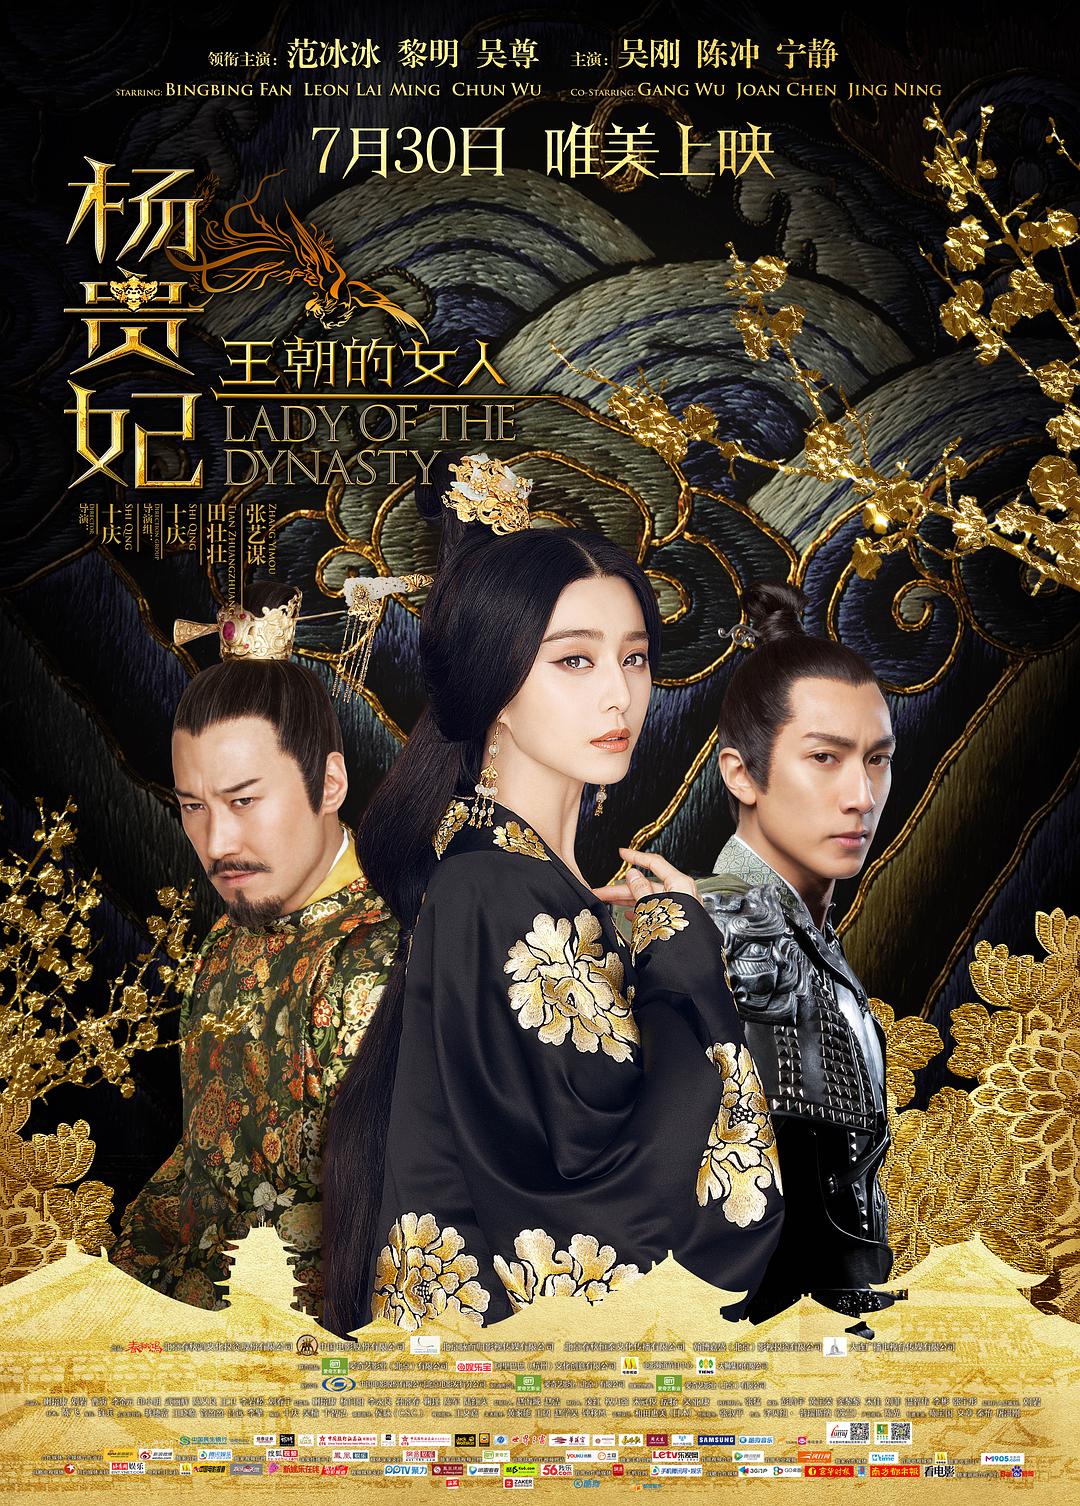 Ůˡ Lady.of.the.Dynasty.2015.CHINESE.1080p.BluRay.x264.DTS-FGT 7.99GB-1.png